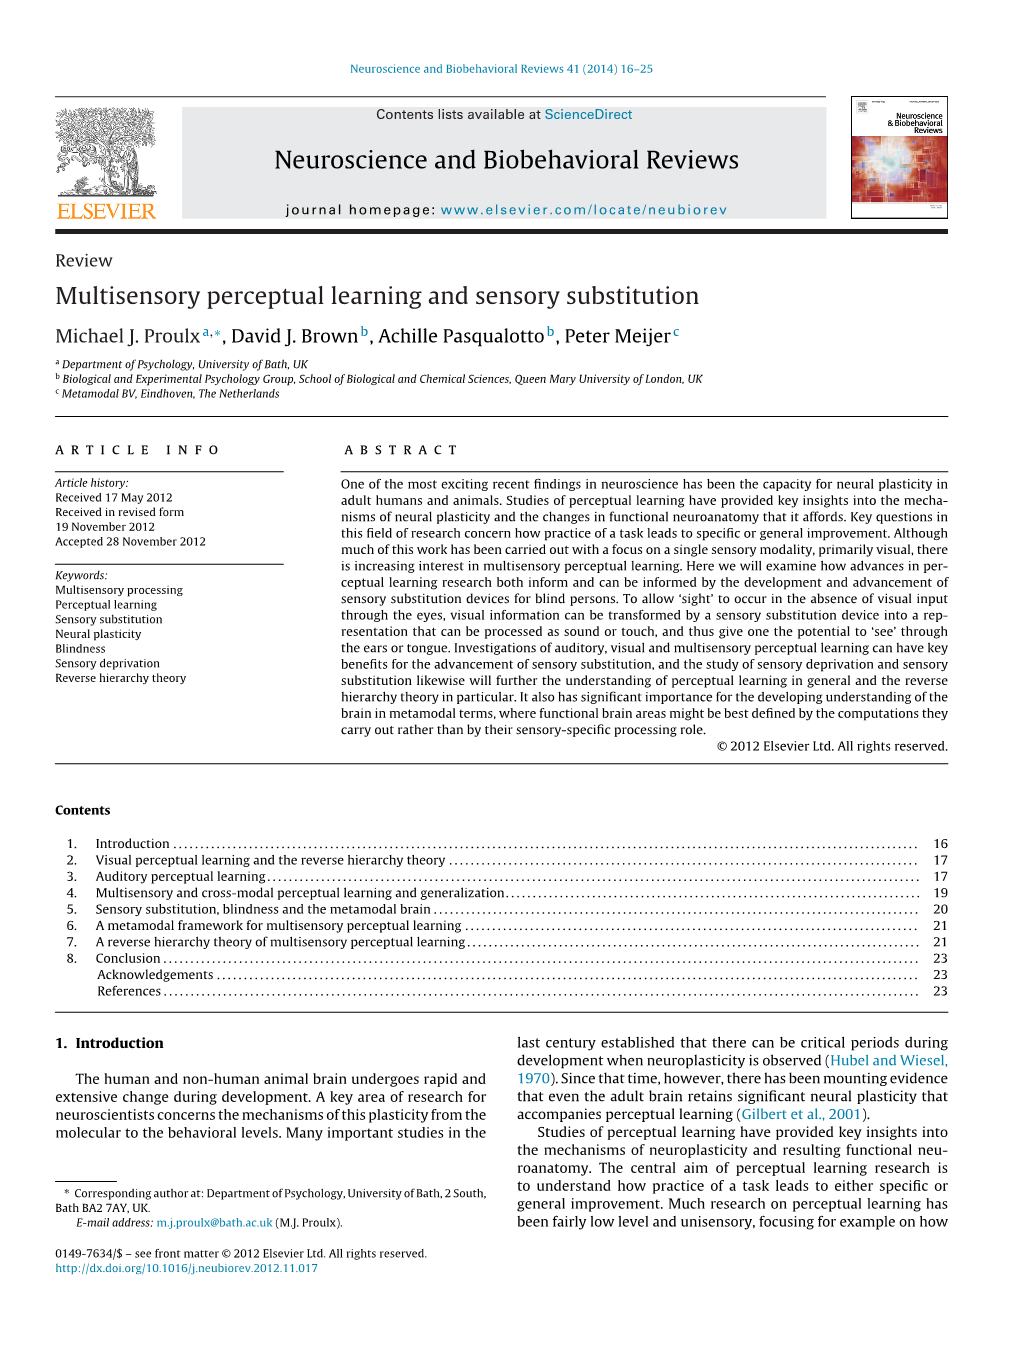 Reviewmultisensory Perceptual Learning and Sensory Substitution.Pdf